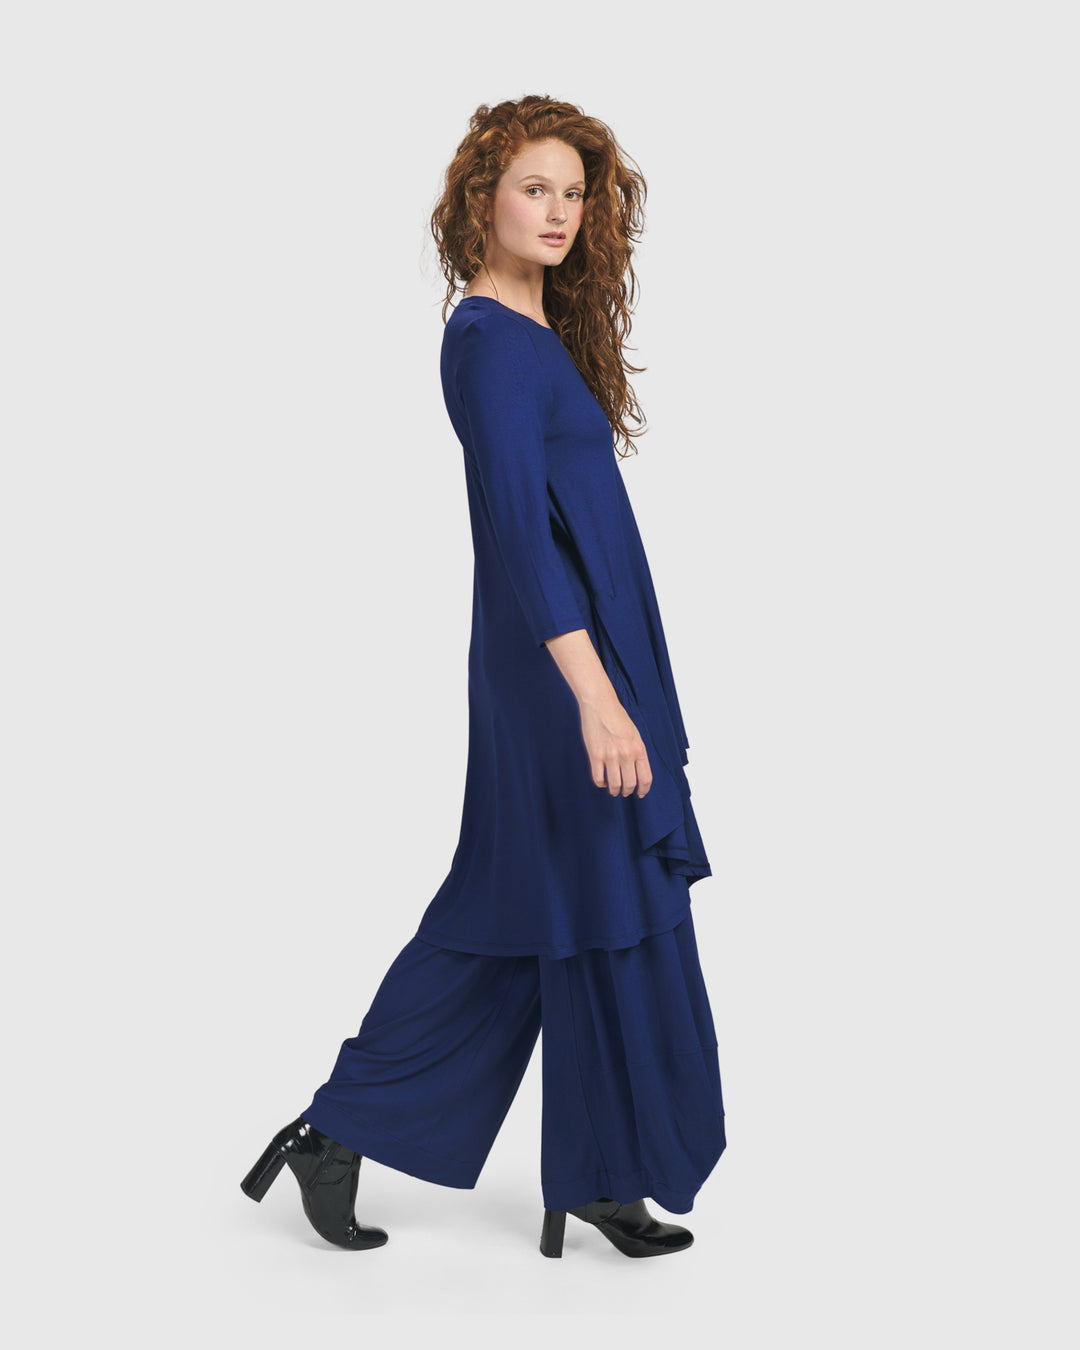 Essential Swing Tunic Top, Royal Blue